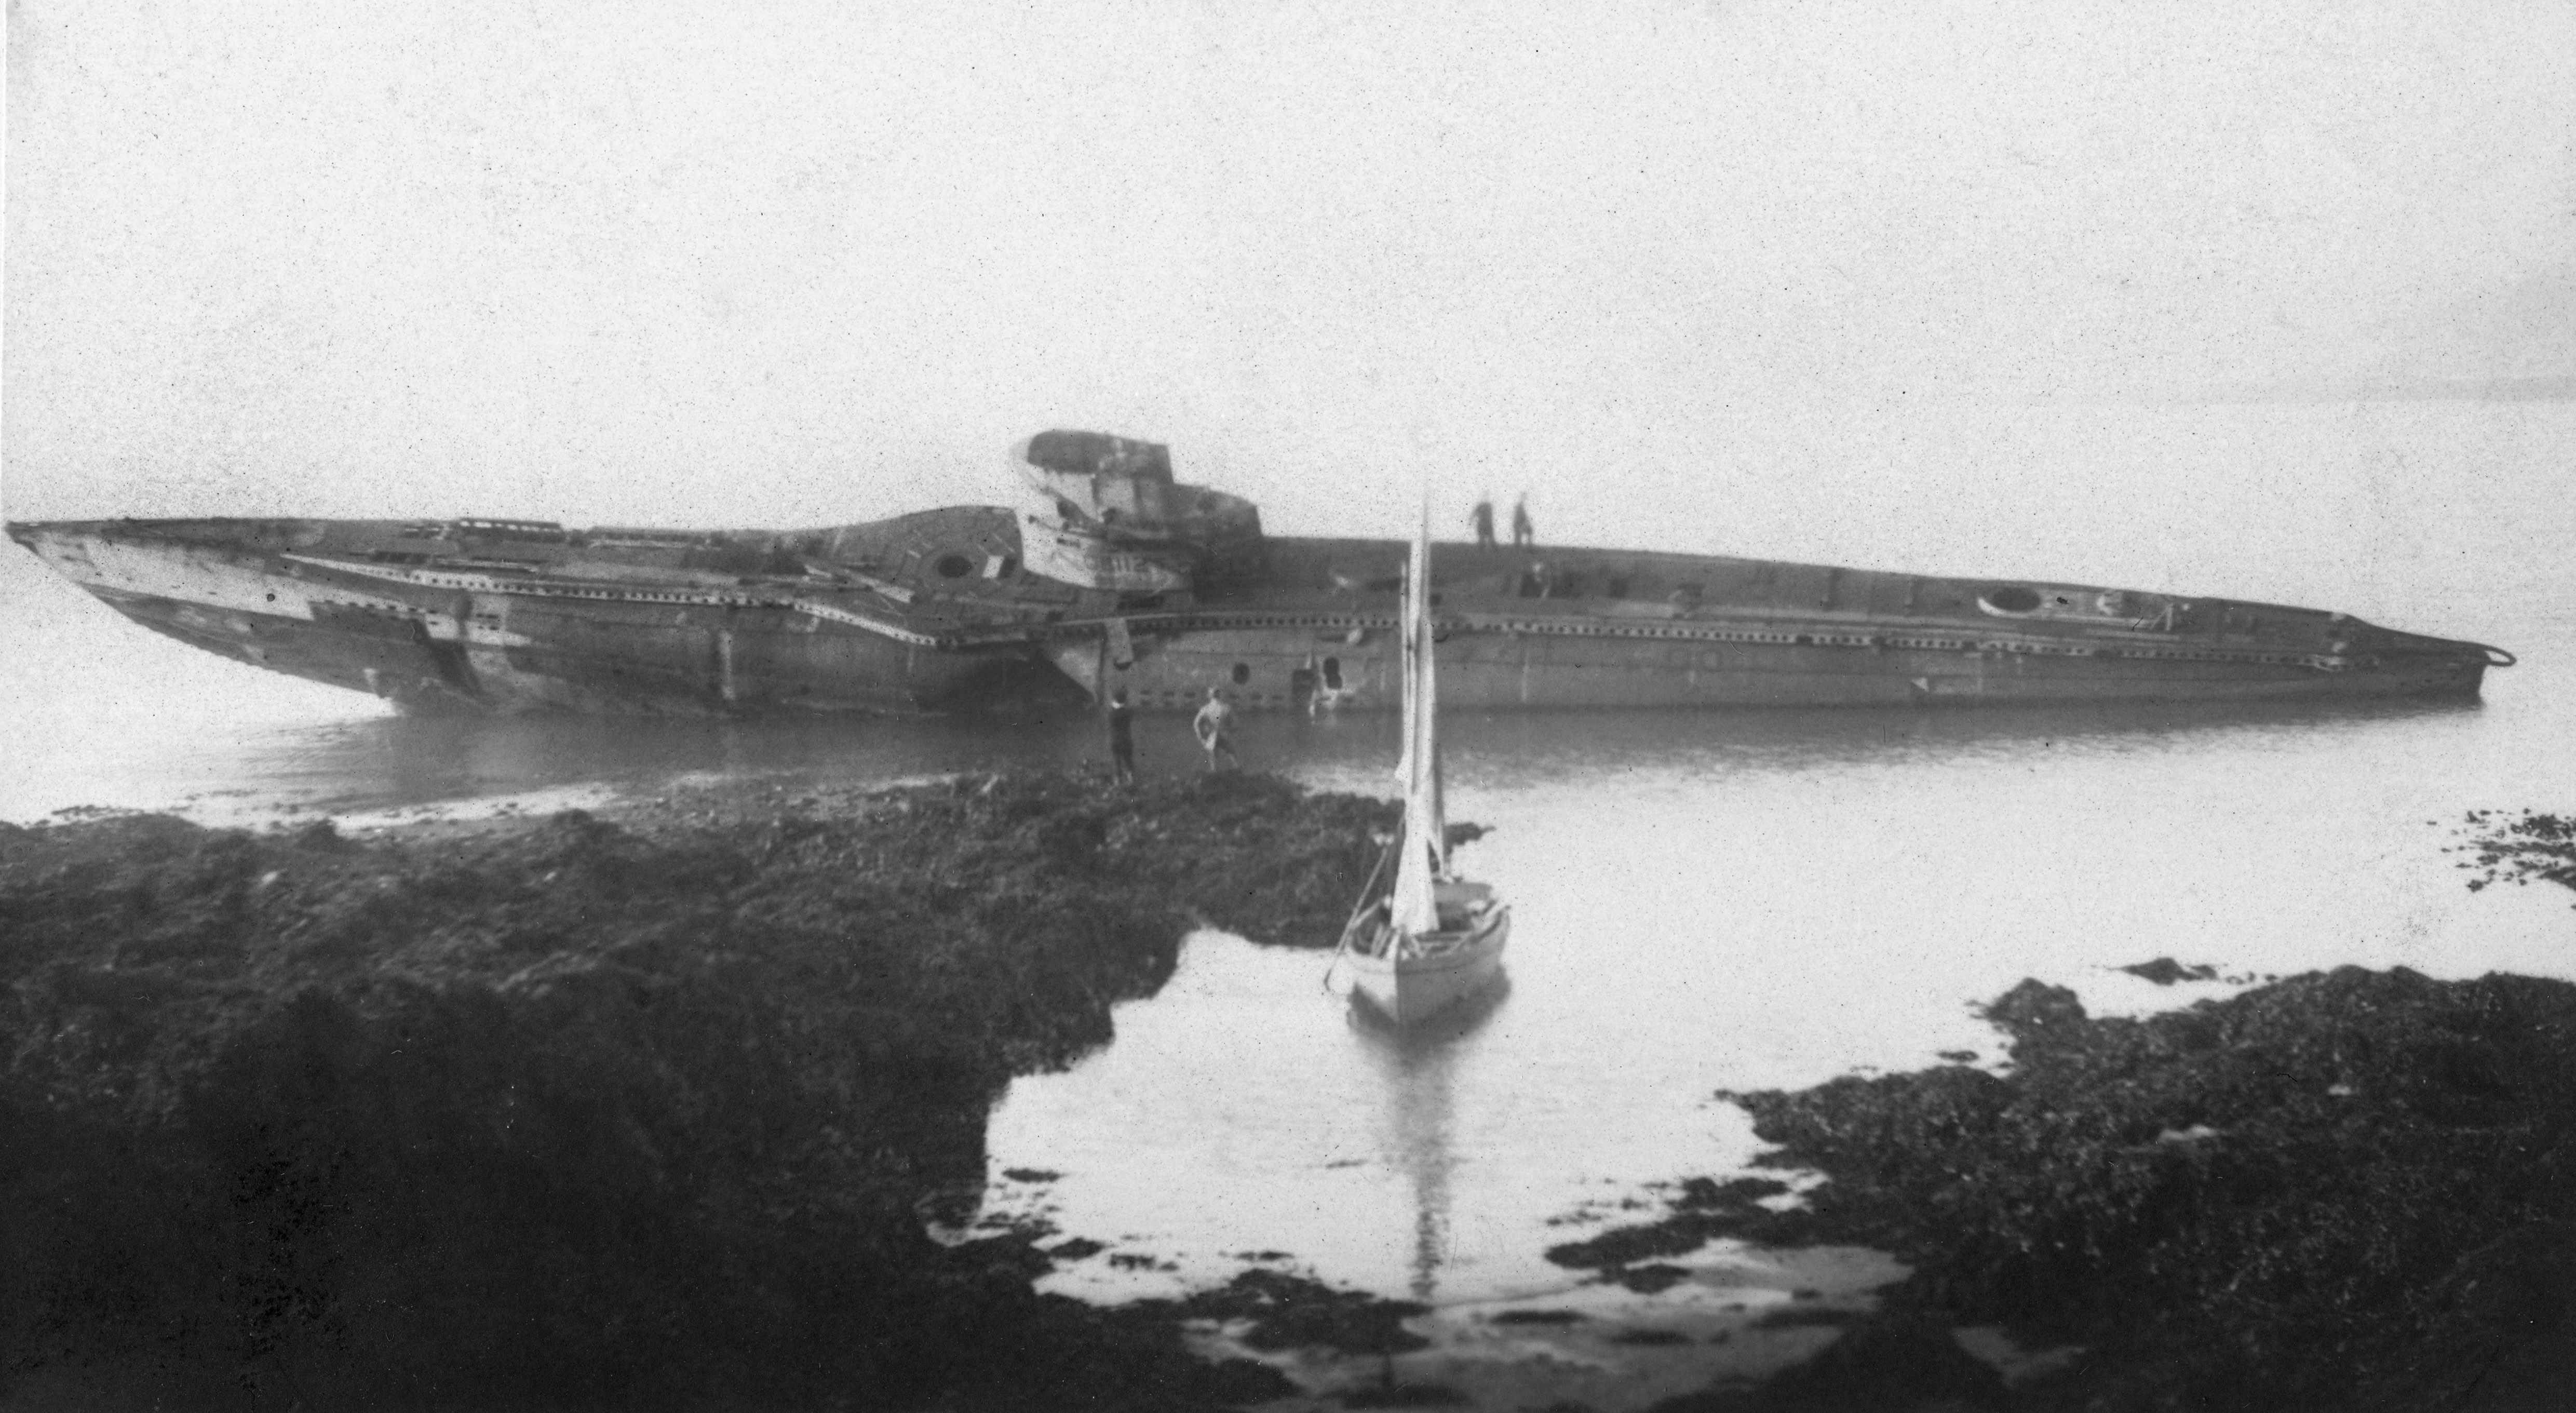 Archive image of UB-112 on the rocks with a sail boat in the foreground and visitors aboard 